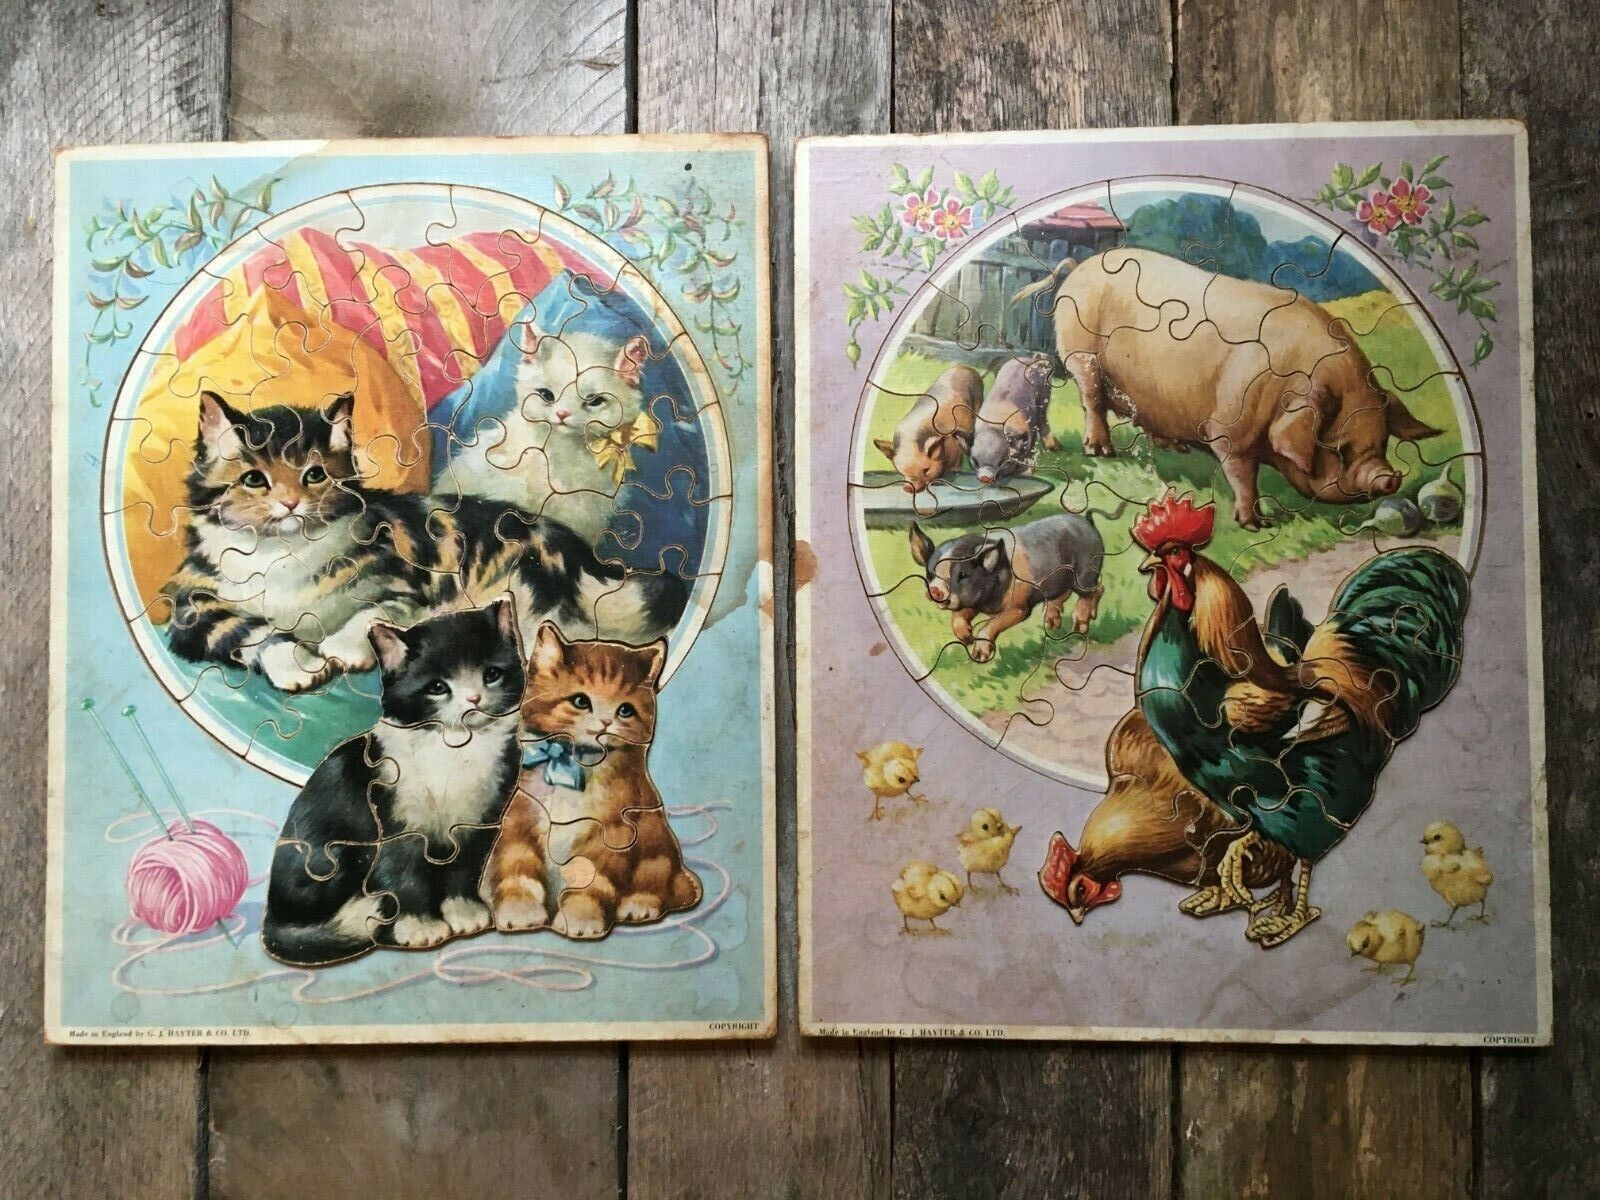 Lot 2 Wooden Childrens Puzzles Victory “Stepping-Out” G J Hayter England